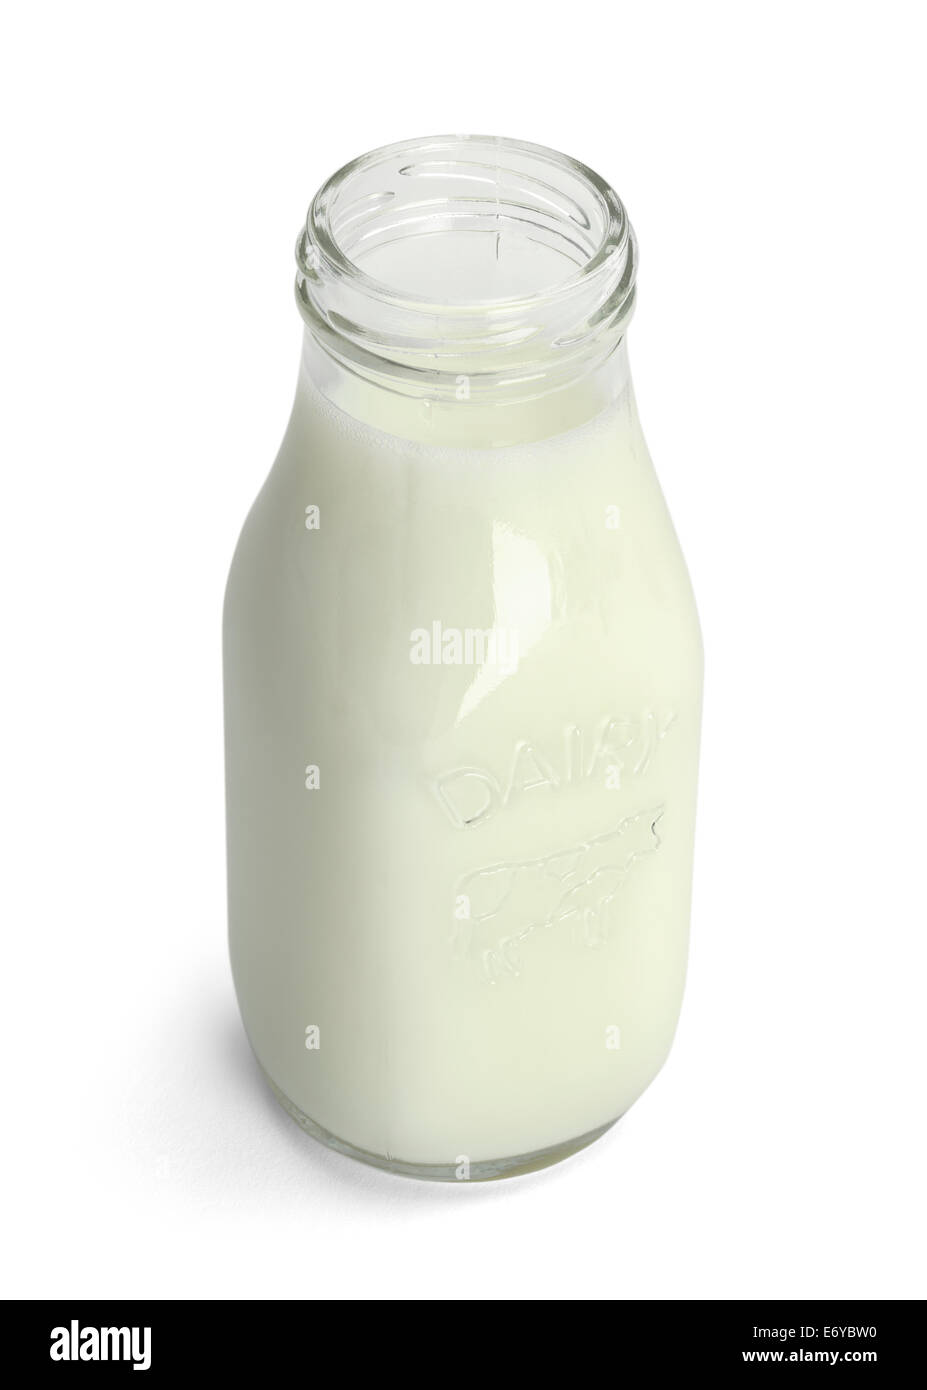 Offenen Glasflasche Milch, Isolated on White Background. Stockfoto